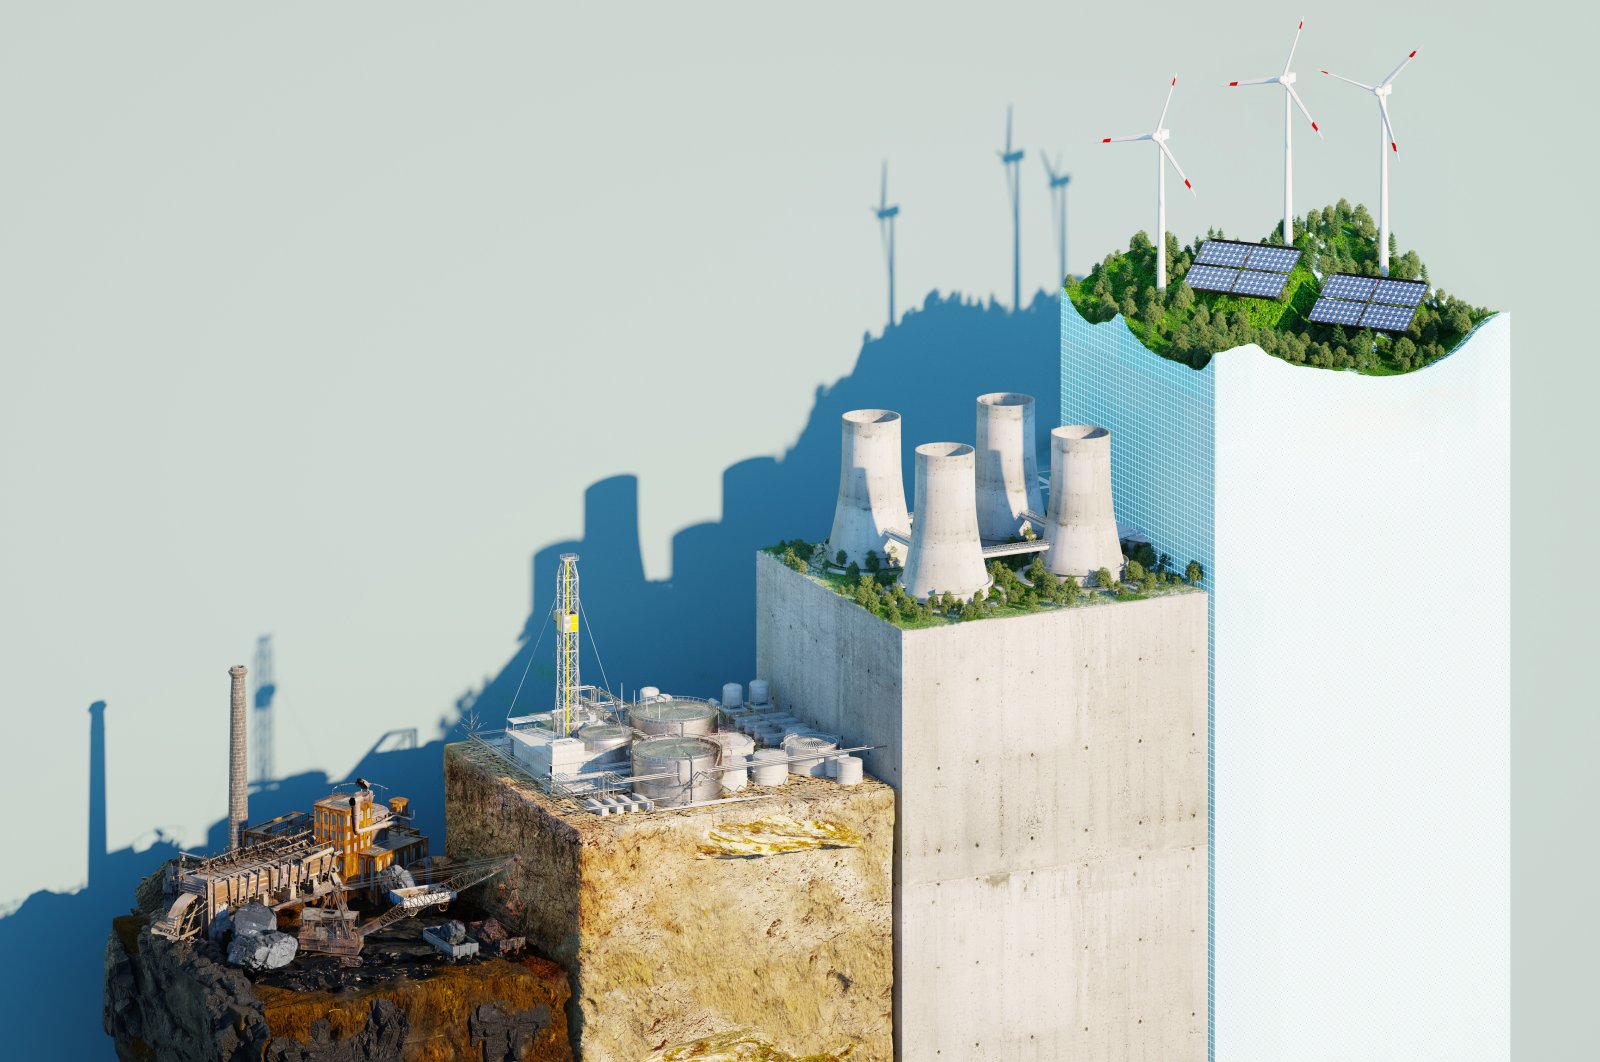 Digital generated image of sustainable growing bar chart made out of cubes and multiple environments showing transforming process from coal industry to green energy. (Getty Images Illustration)